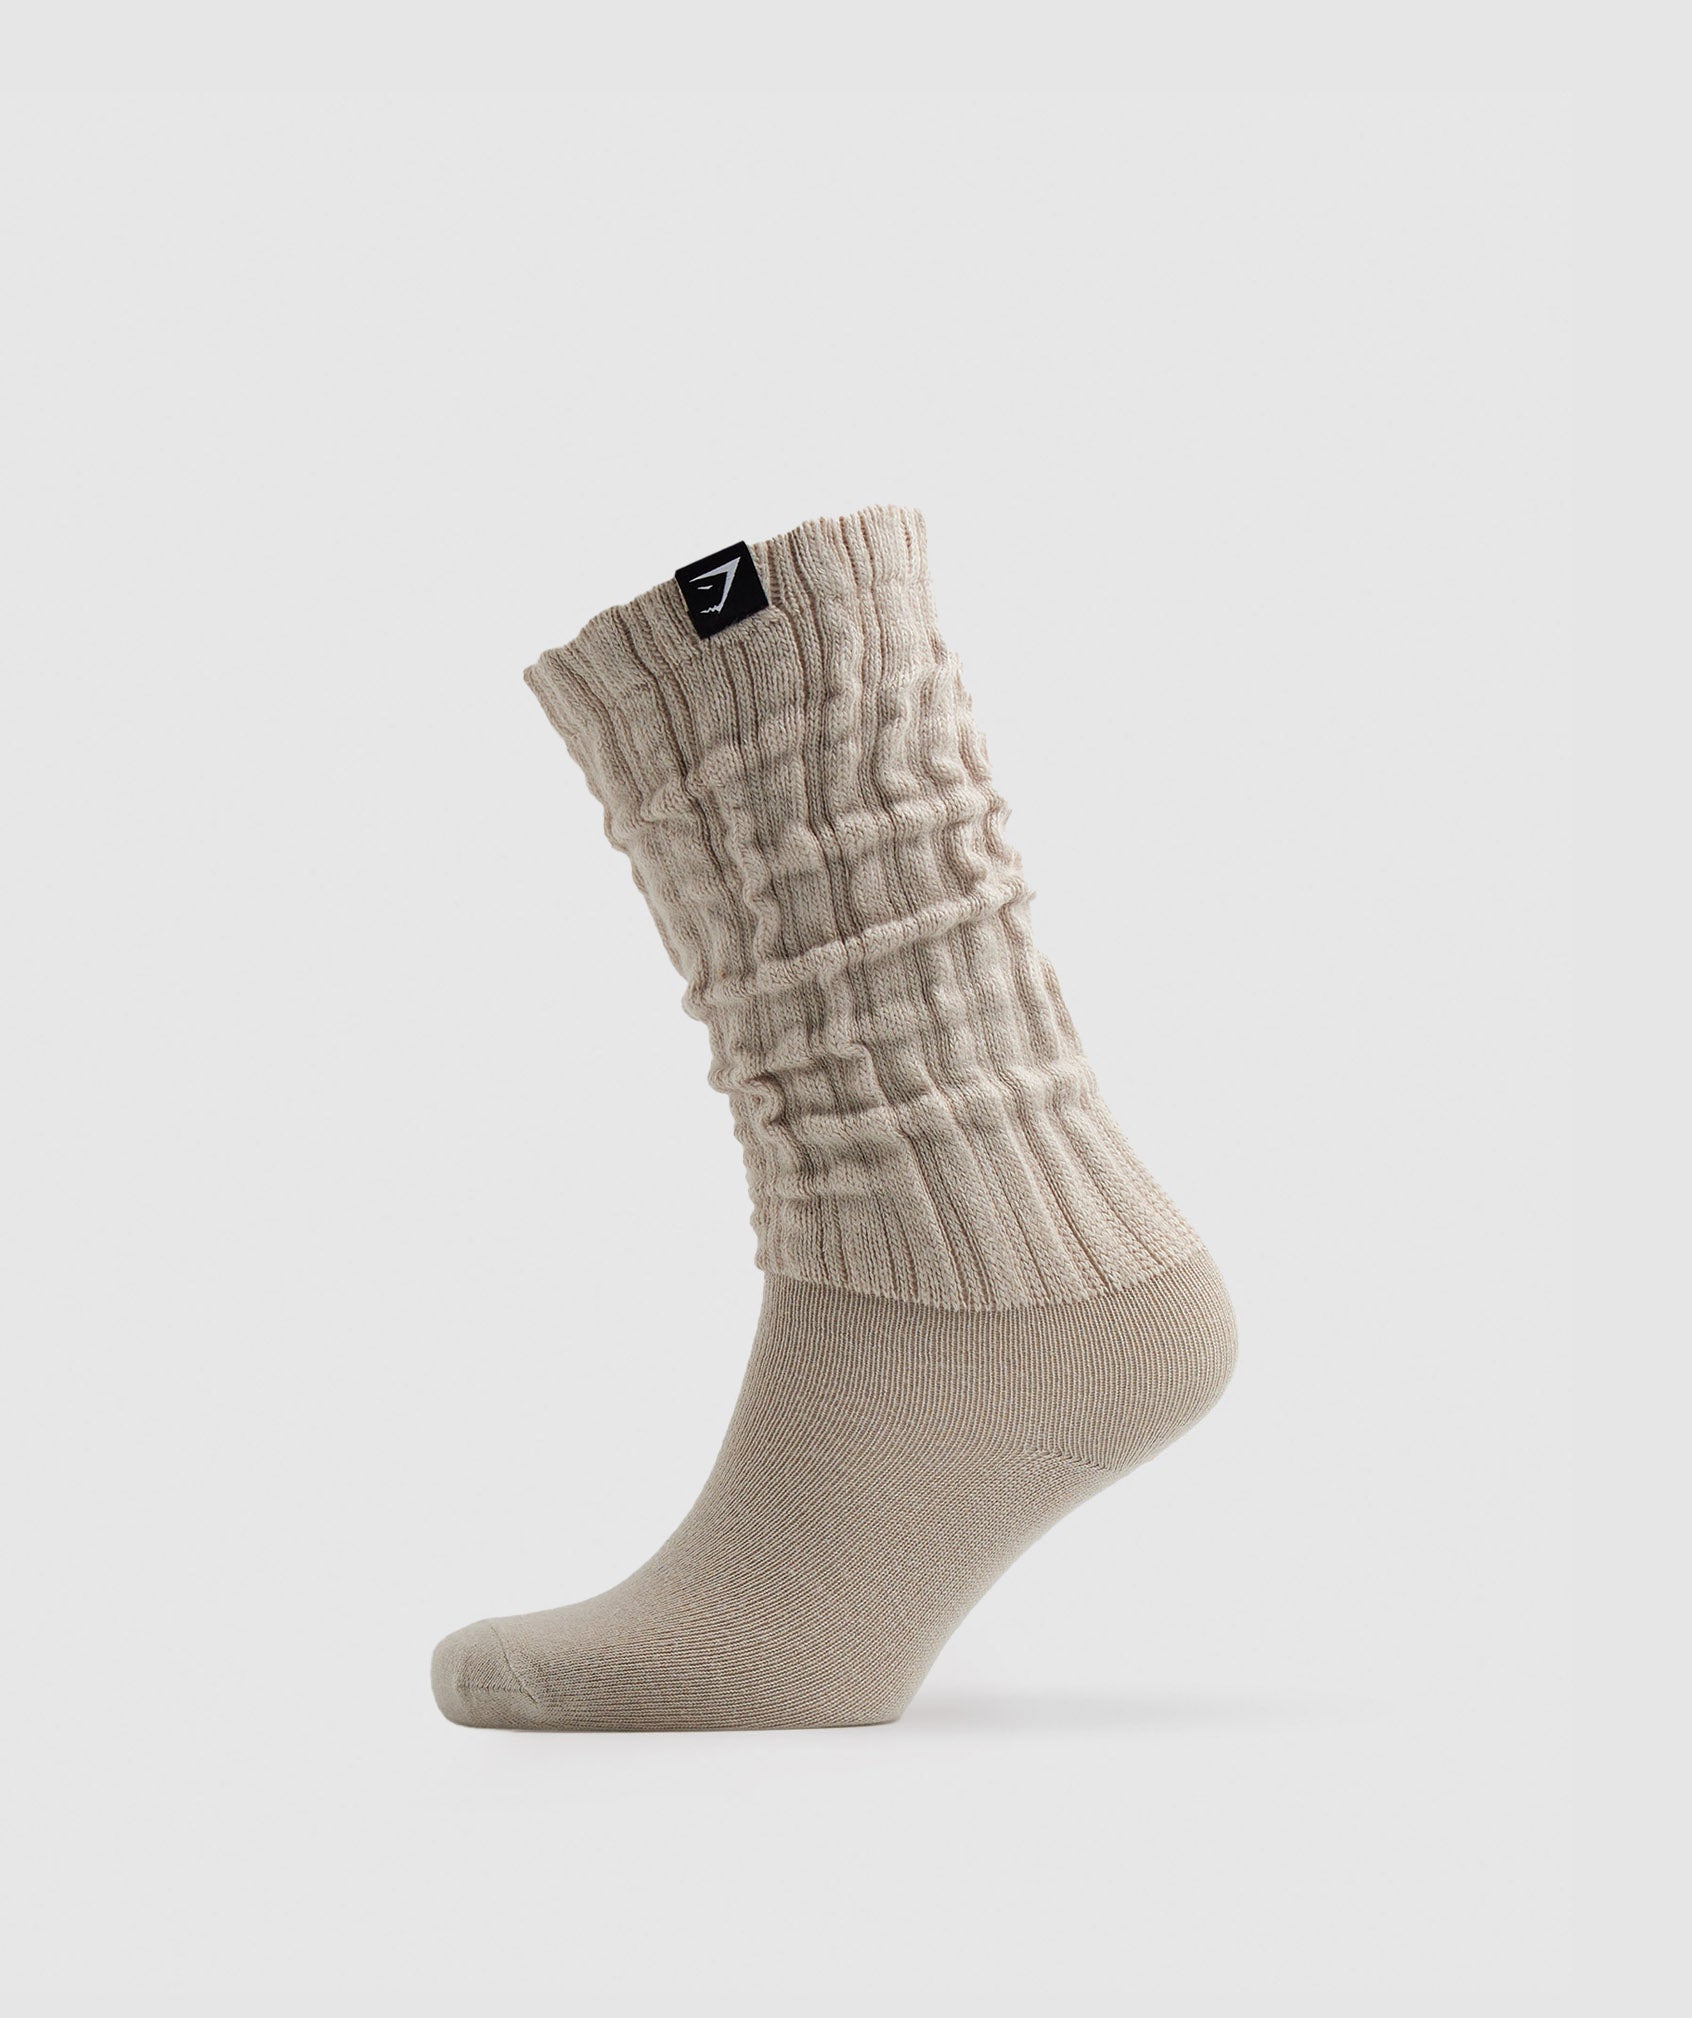 Comfy Rest Day Socks in Pebble Grey - view 1